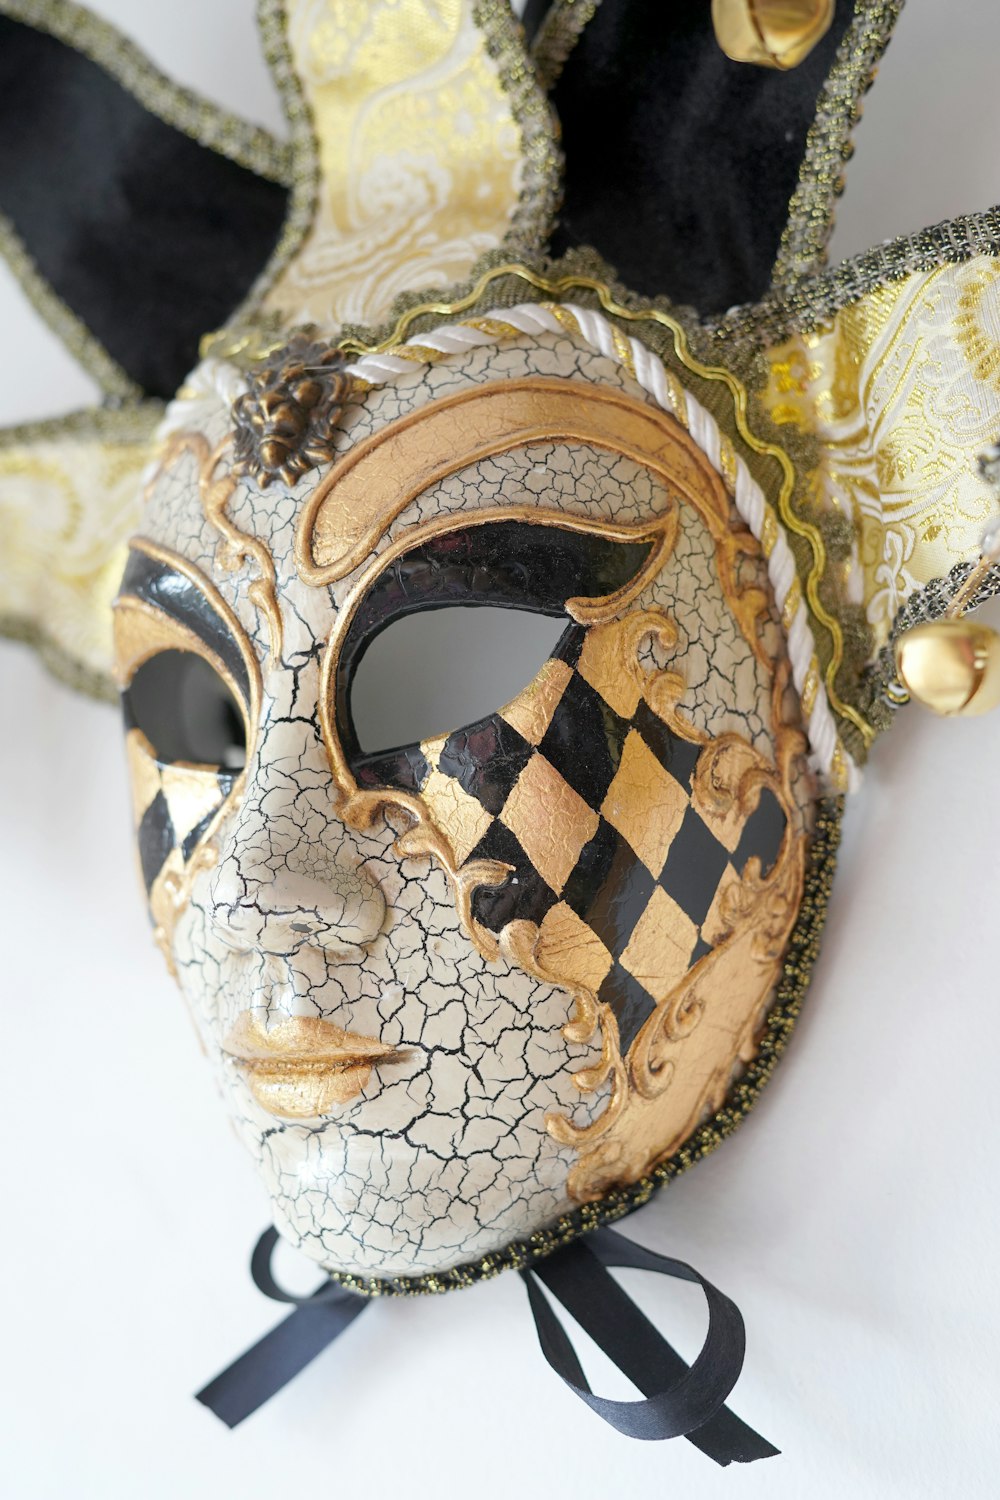 a close up of a mask on a white surface